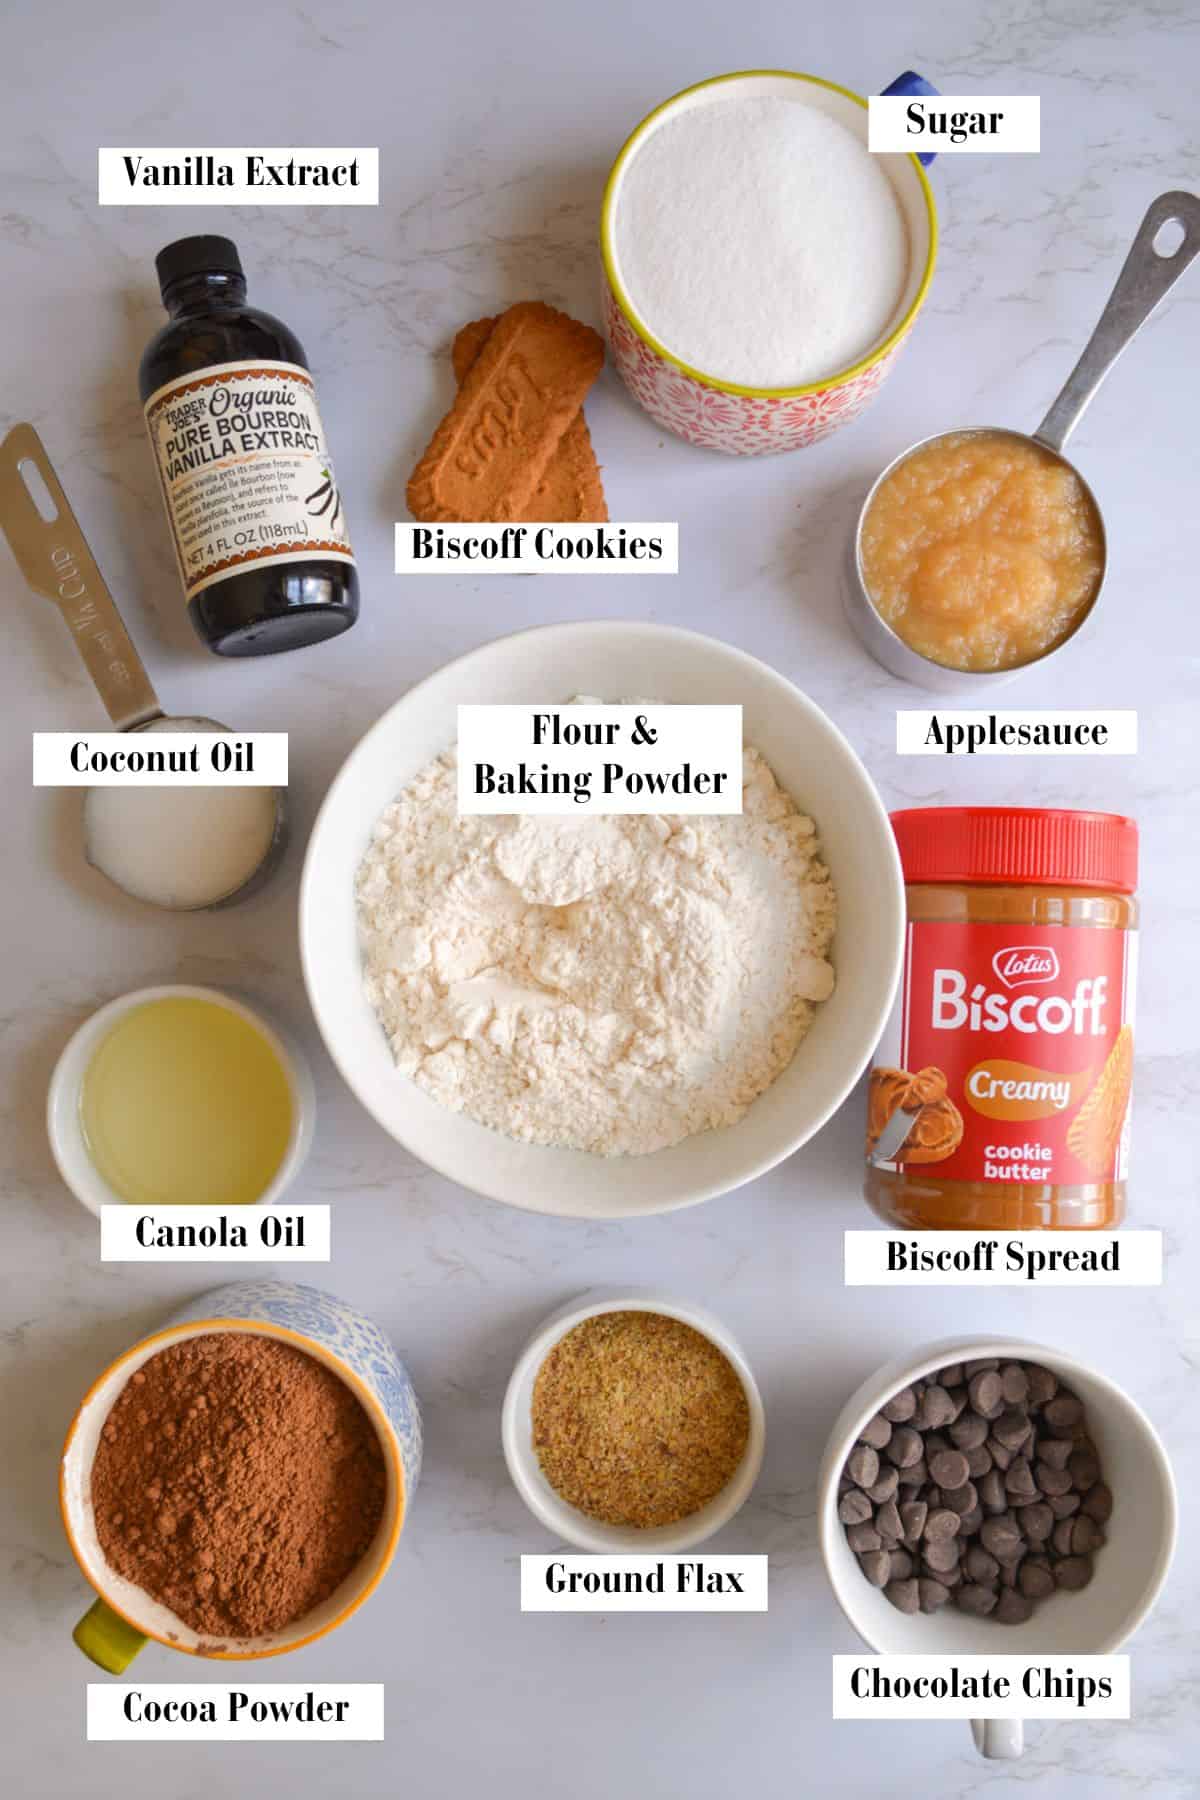 Ingredients needed for making this recipe in bowls on a marble surface.